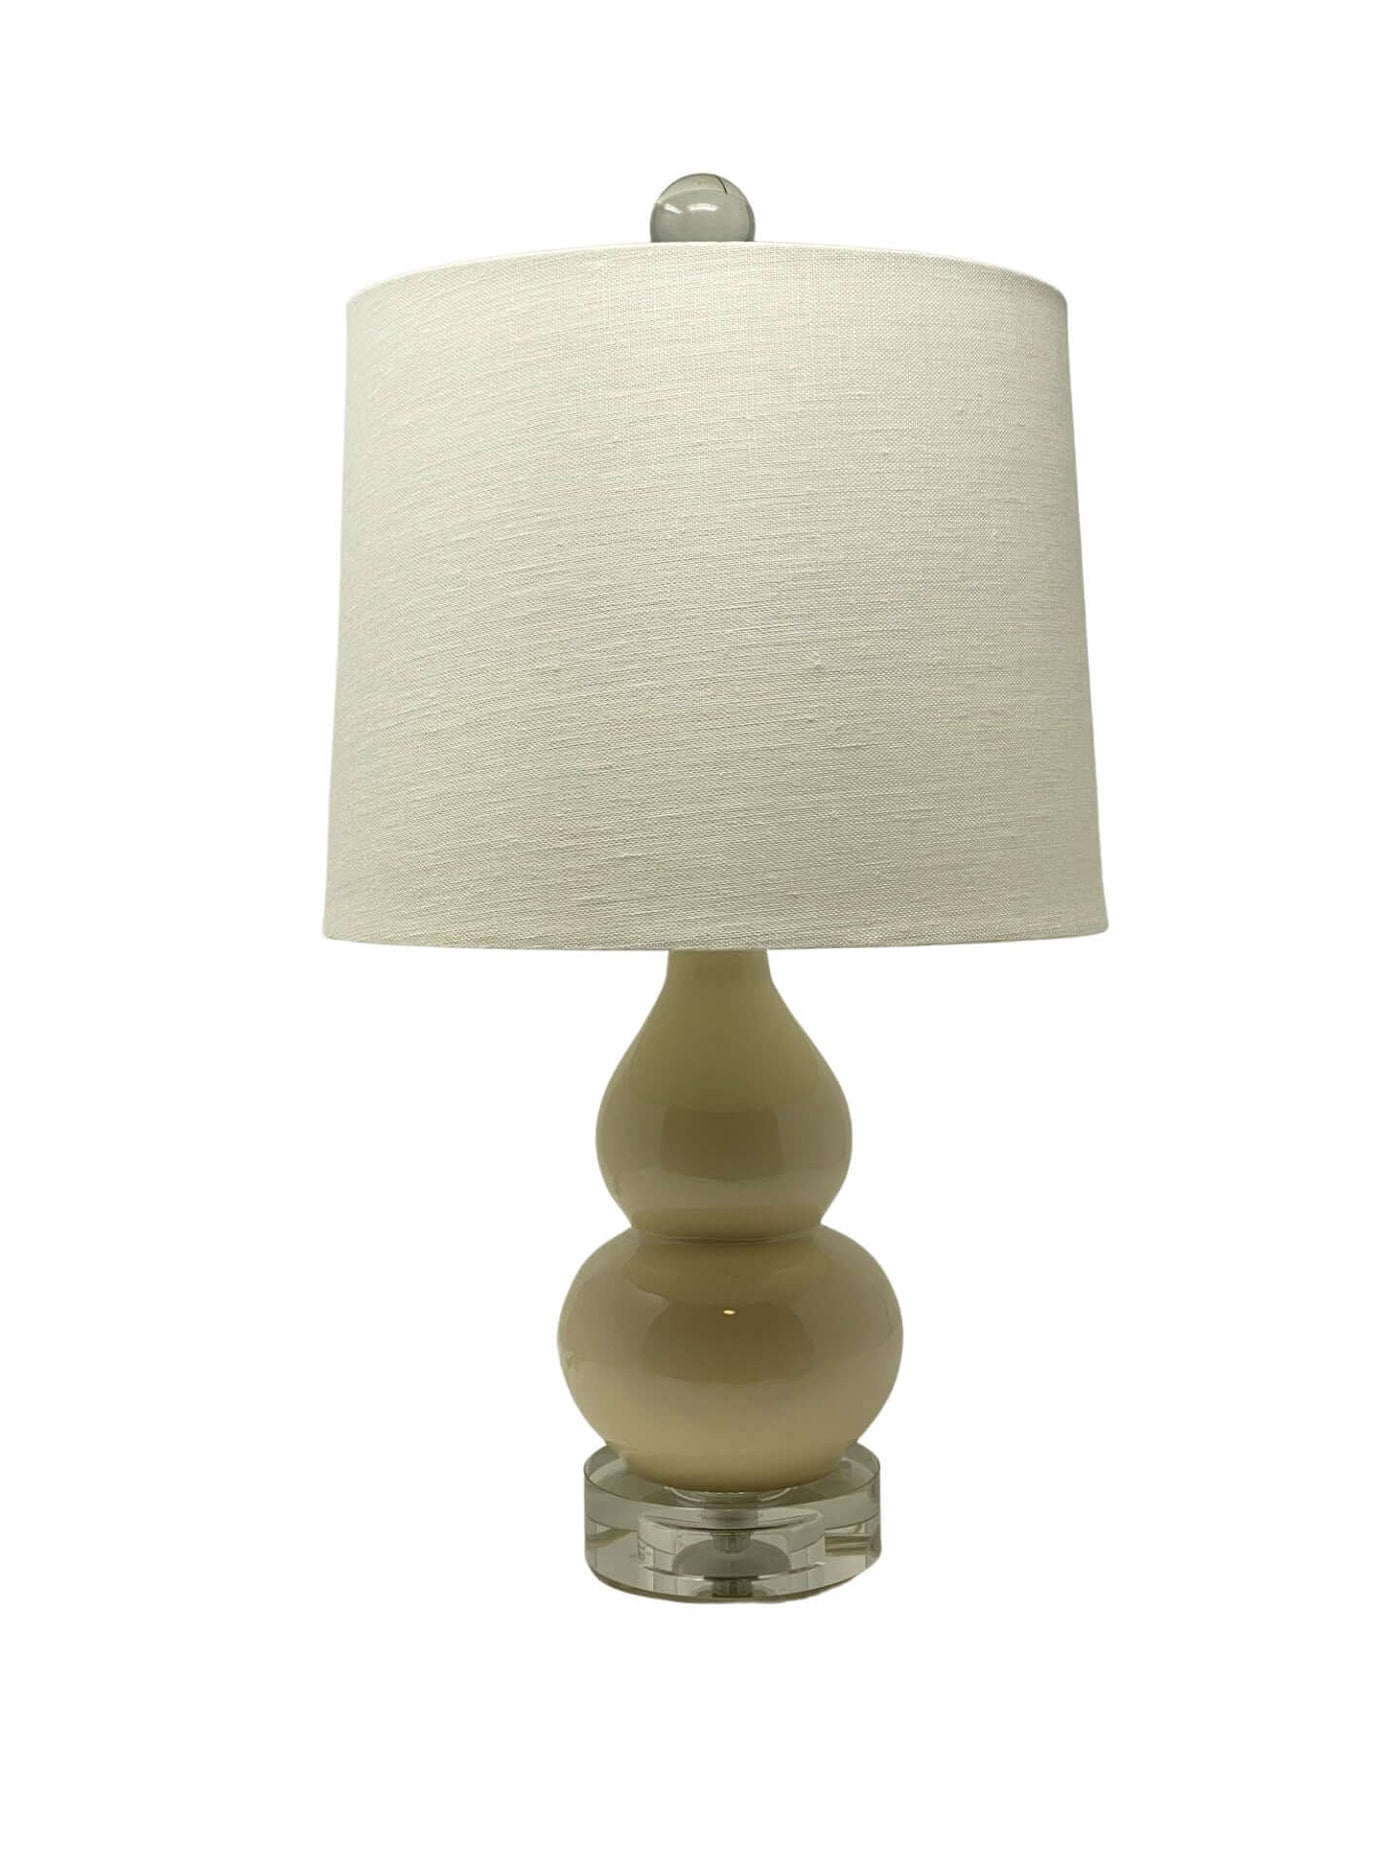 Small Ivory Lamp